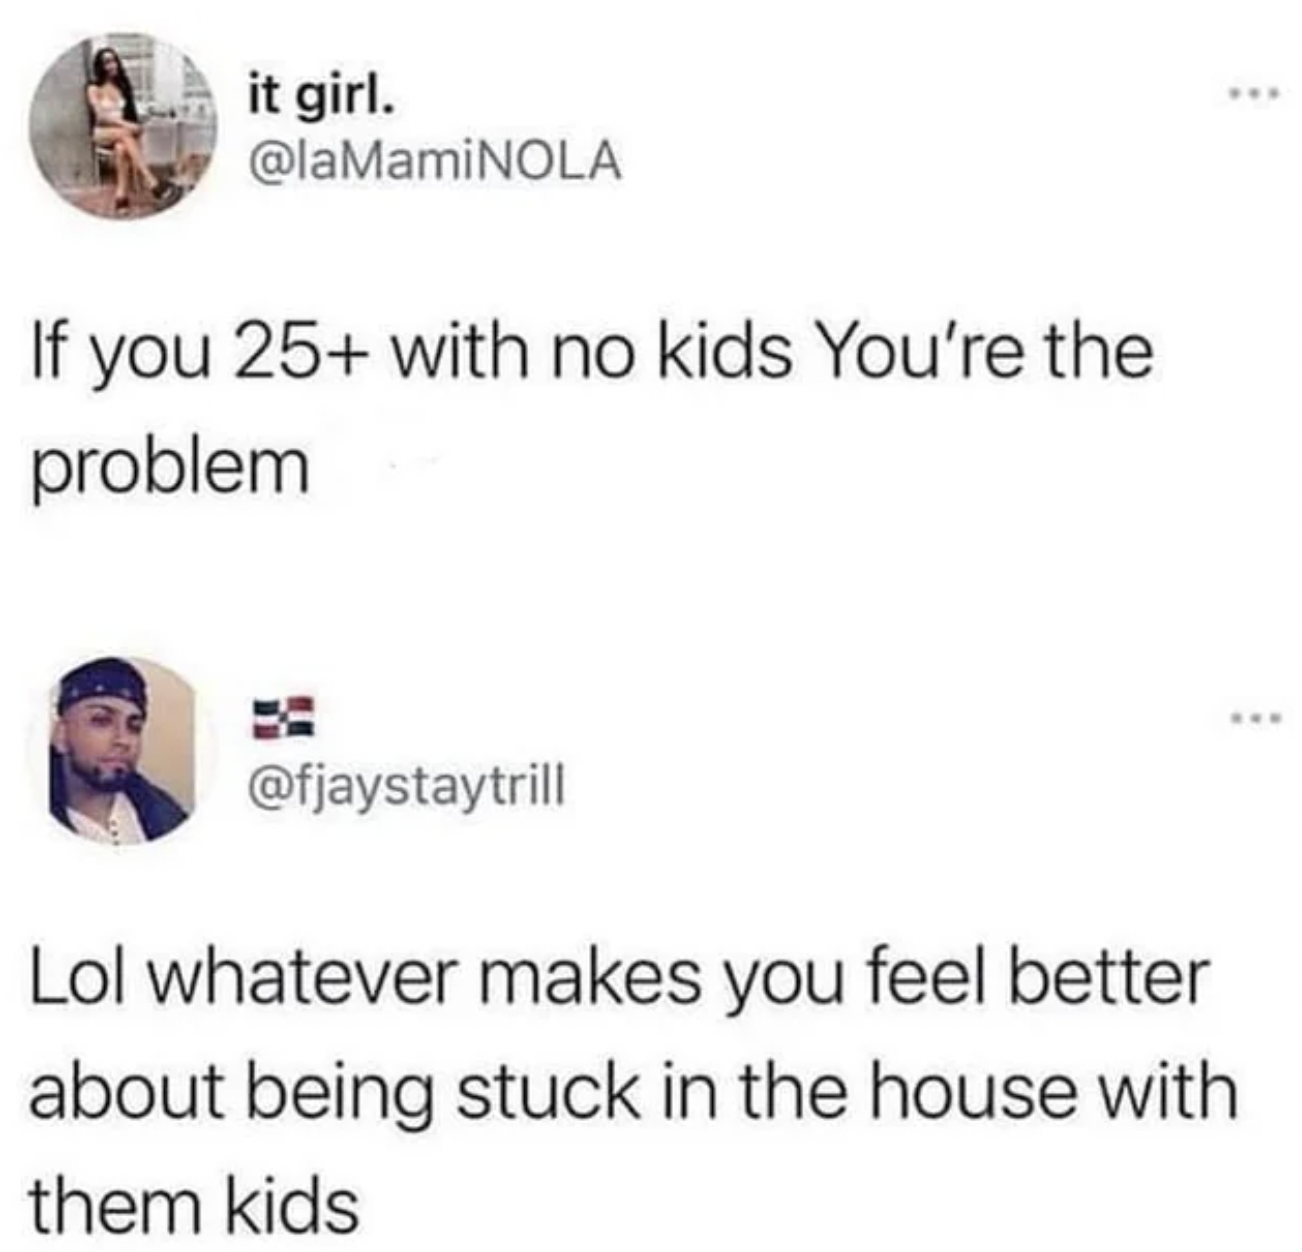 Fails and Facepalms - paper - it girl. If you 25 with no kids You're the problem www www Lol whatever makes you feel better about being stuck in the house with them kids